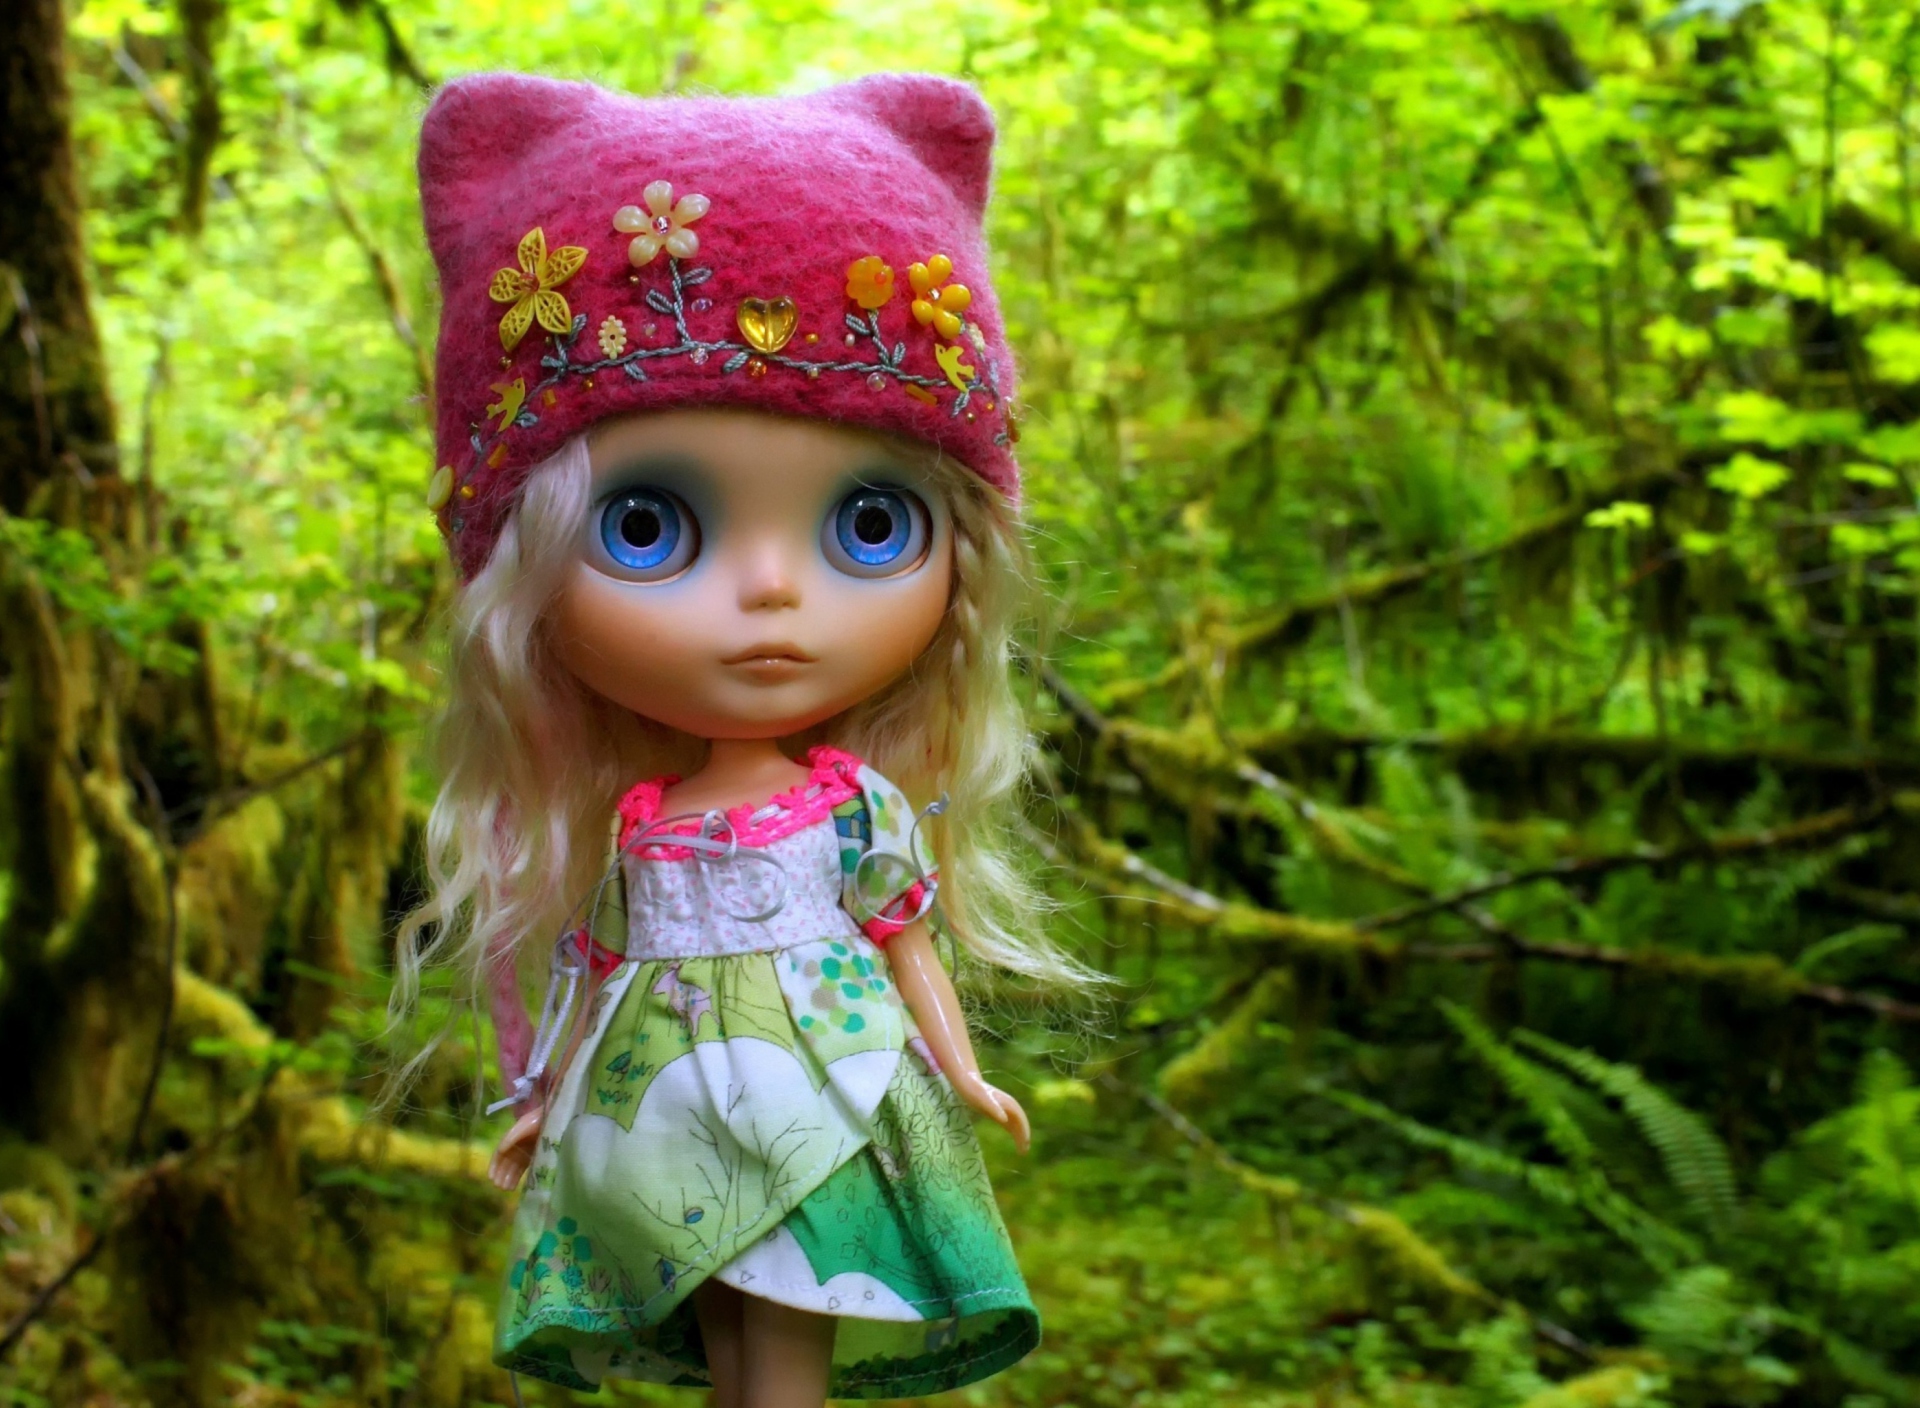 Cute Blonde Doll In Forest wallpaper 1920x1408